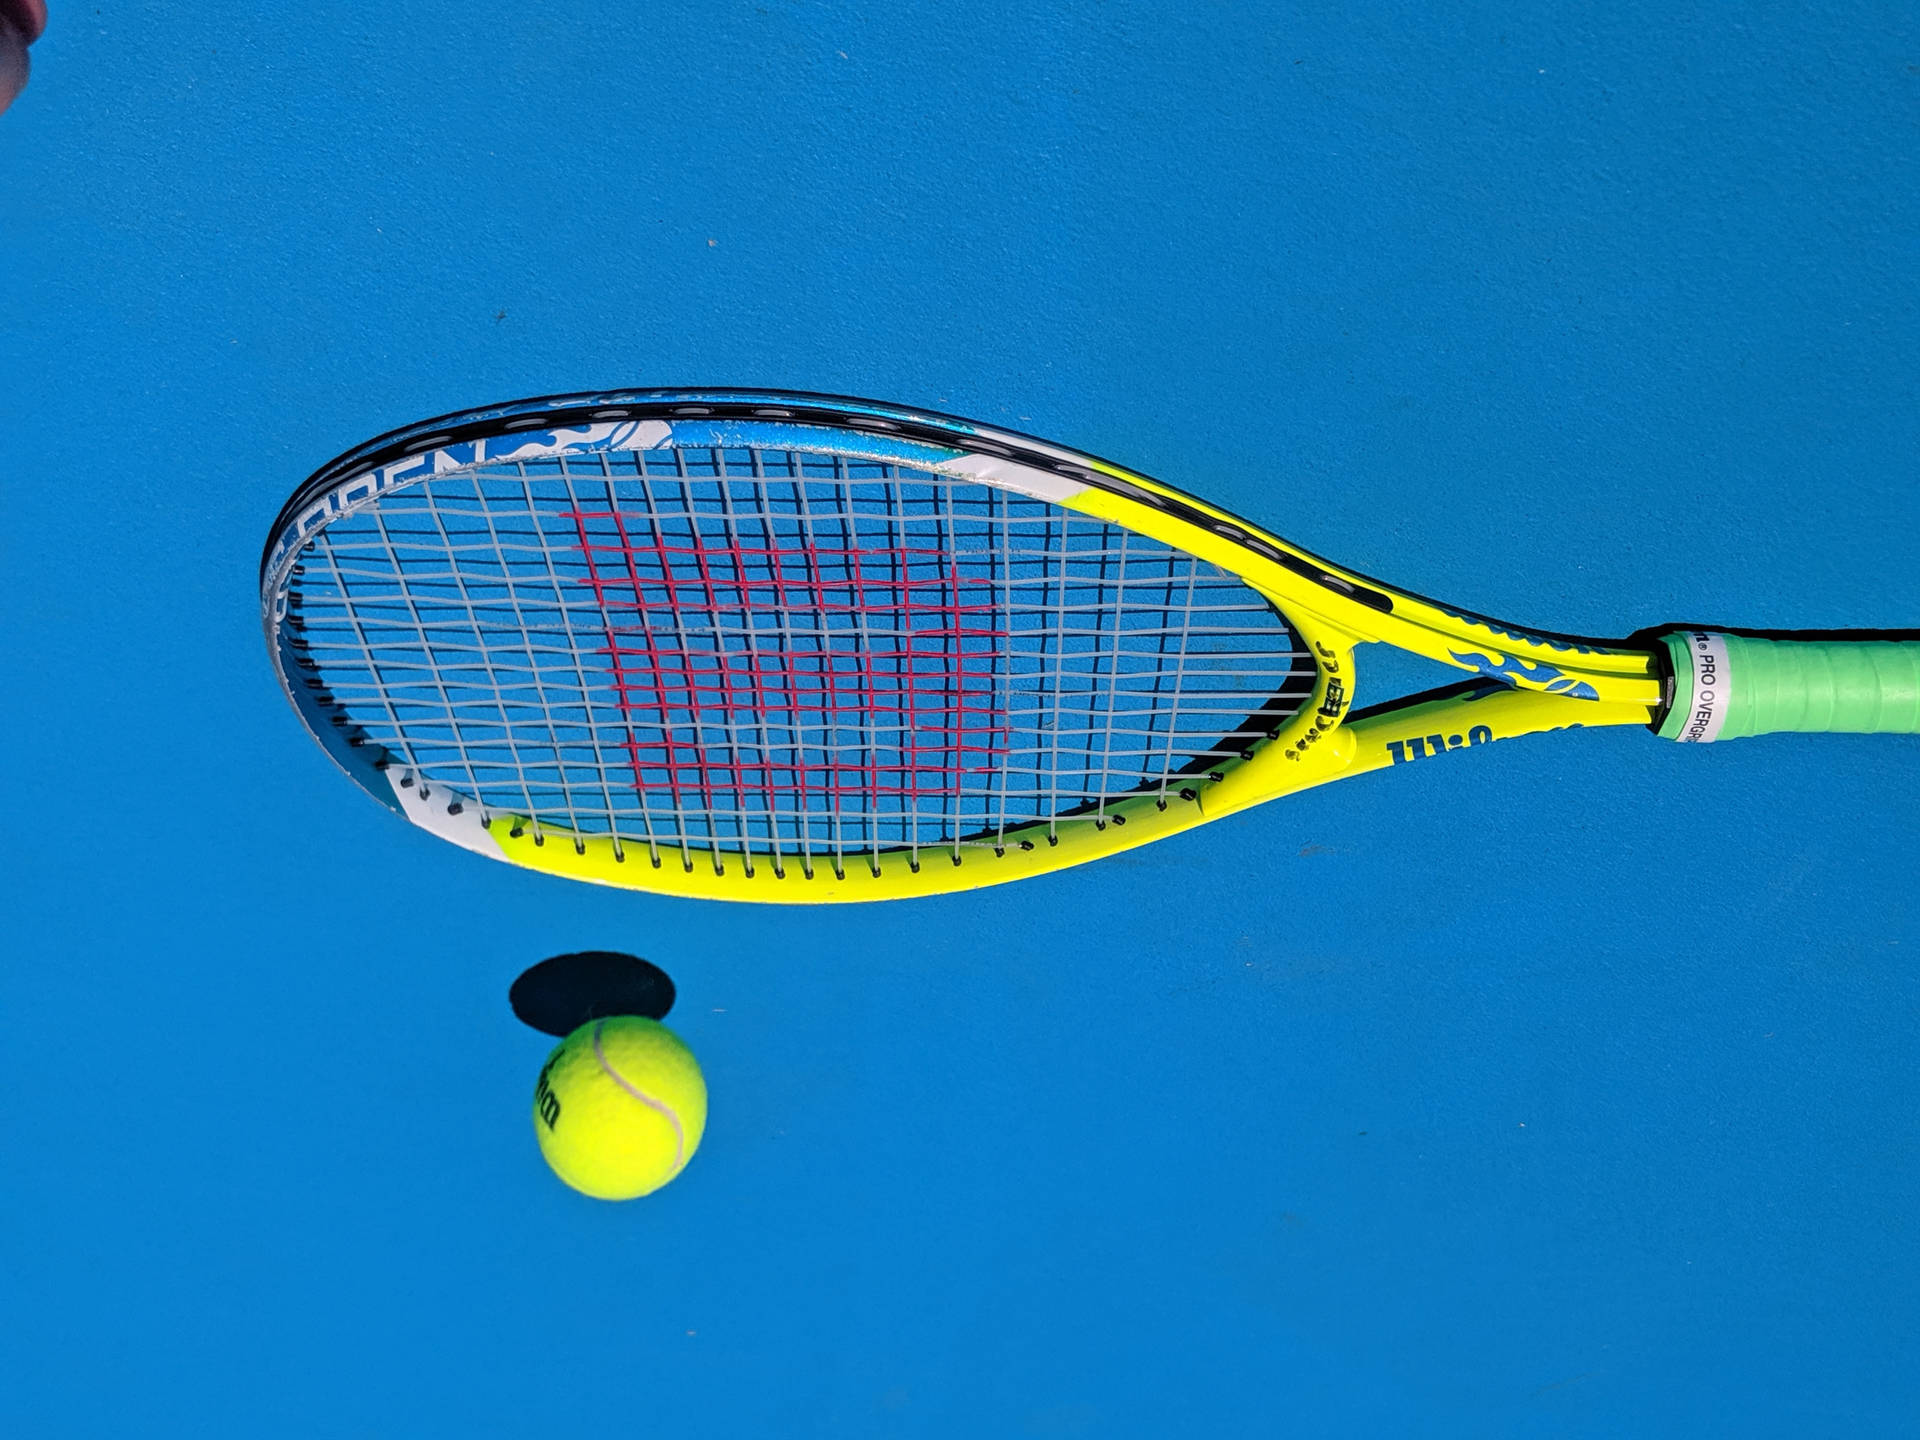 Tennis 4032X3024 Wallpaper and Background Image